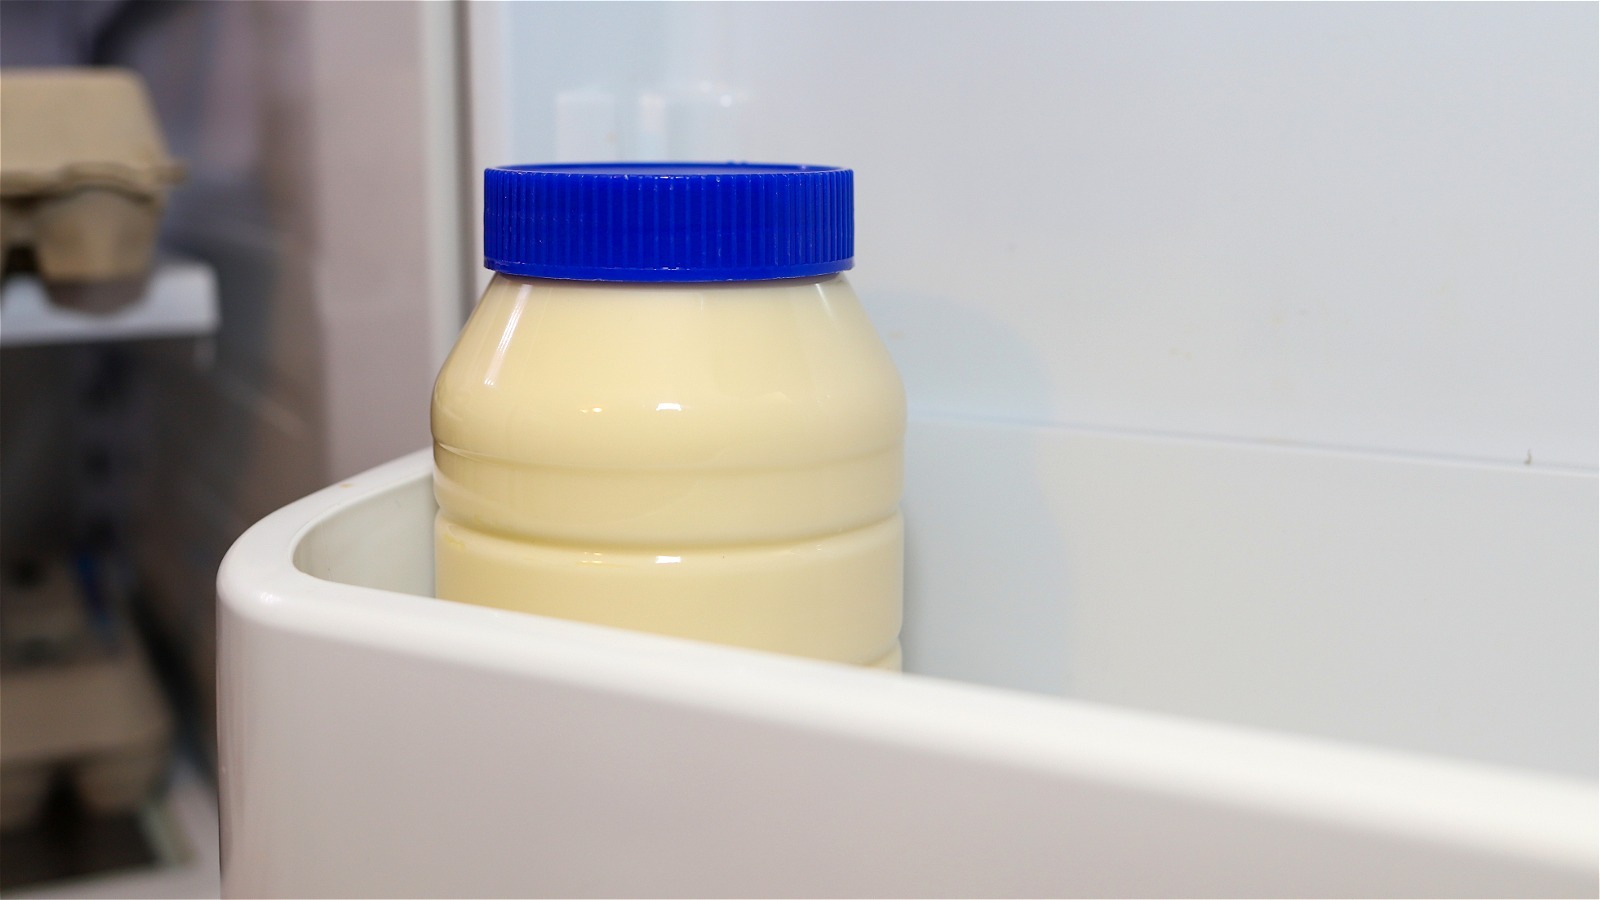 What Is Kewpie Mayo? Discover the Ingredient That Sets It Apart